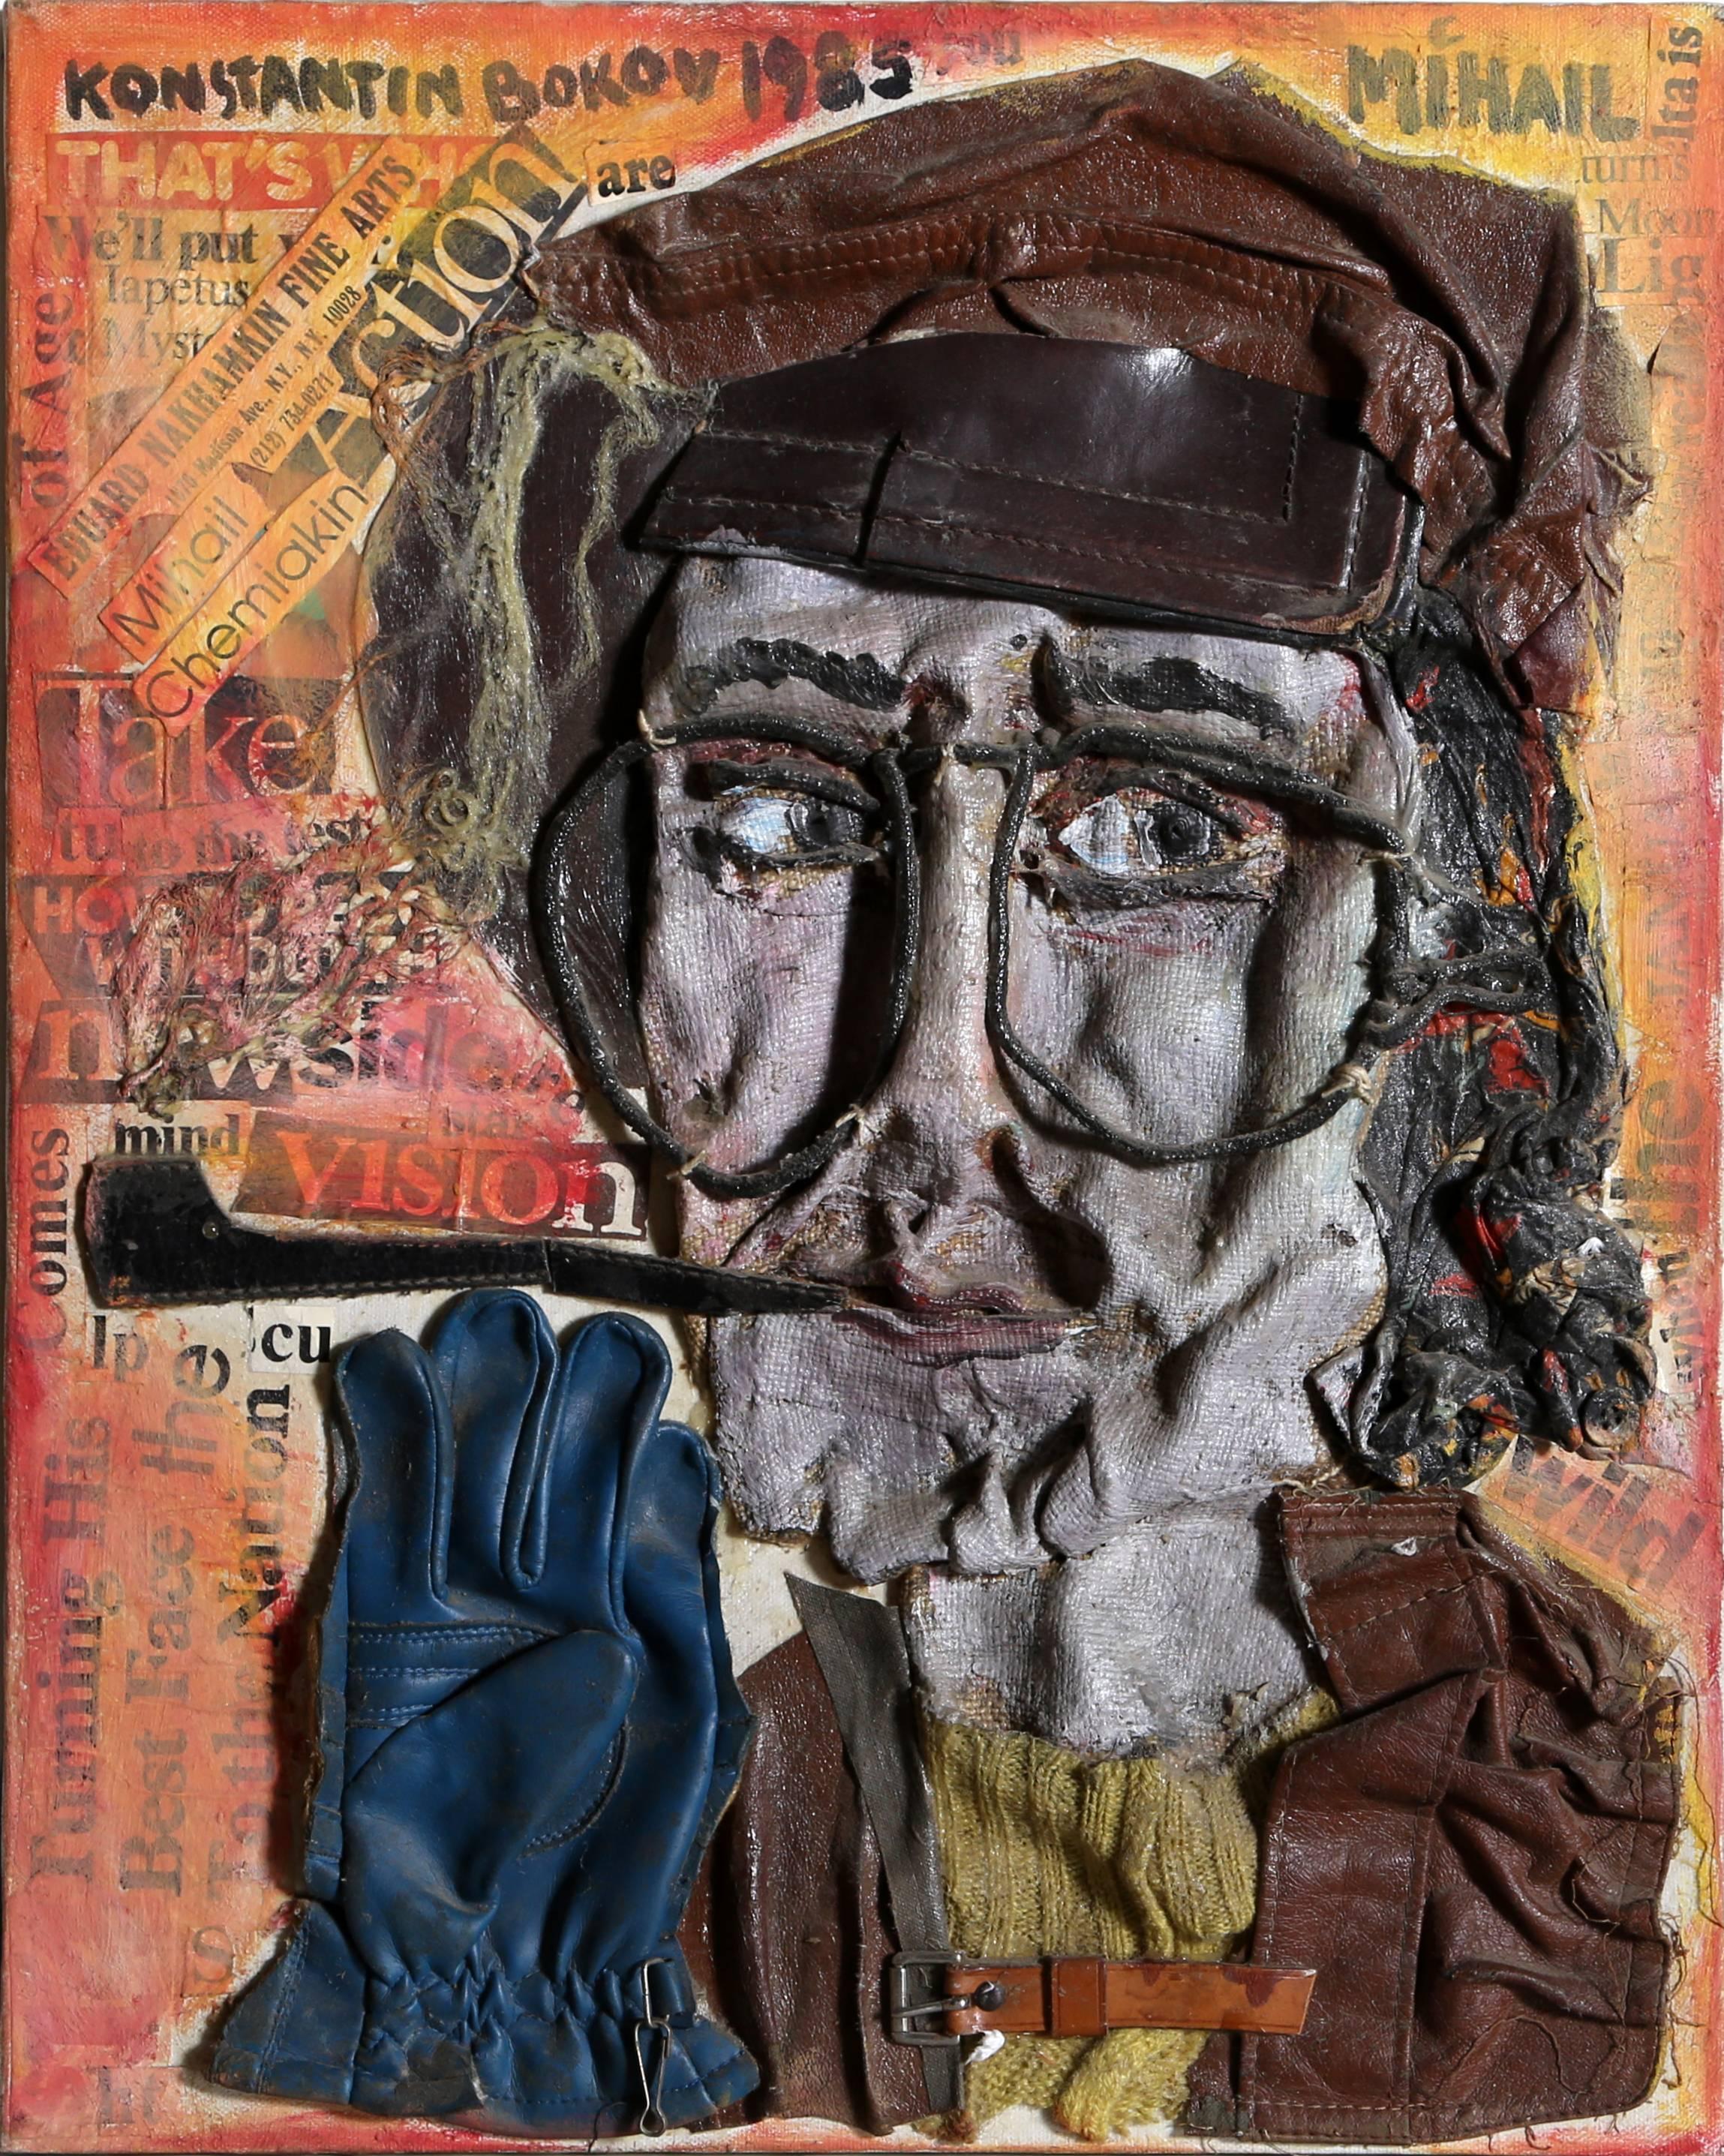 Mihail (Chemiakin), Found Art Collage and Painting by Bokov